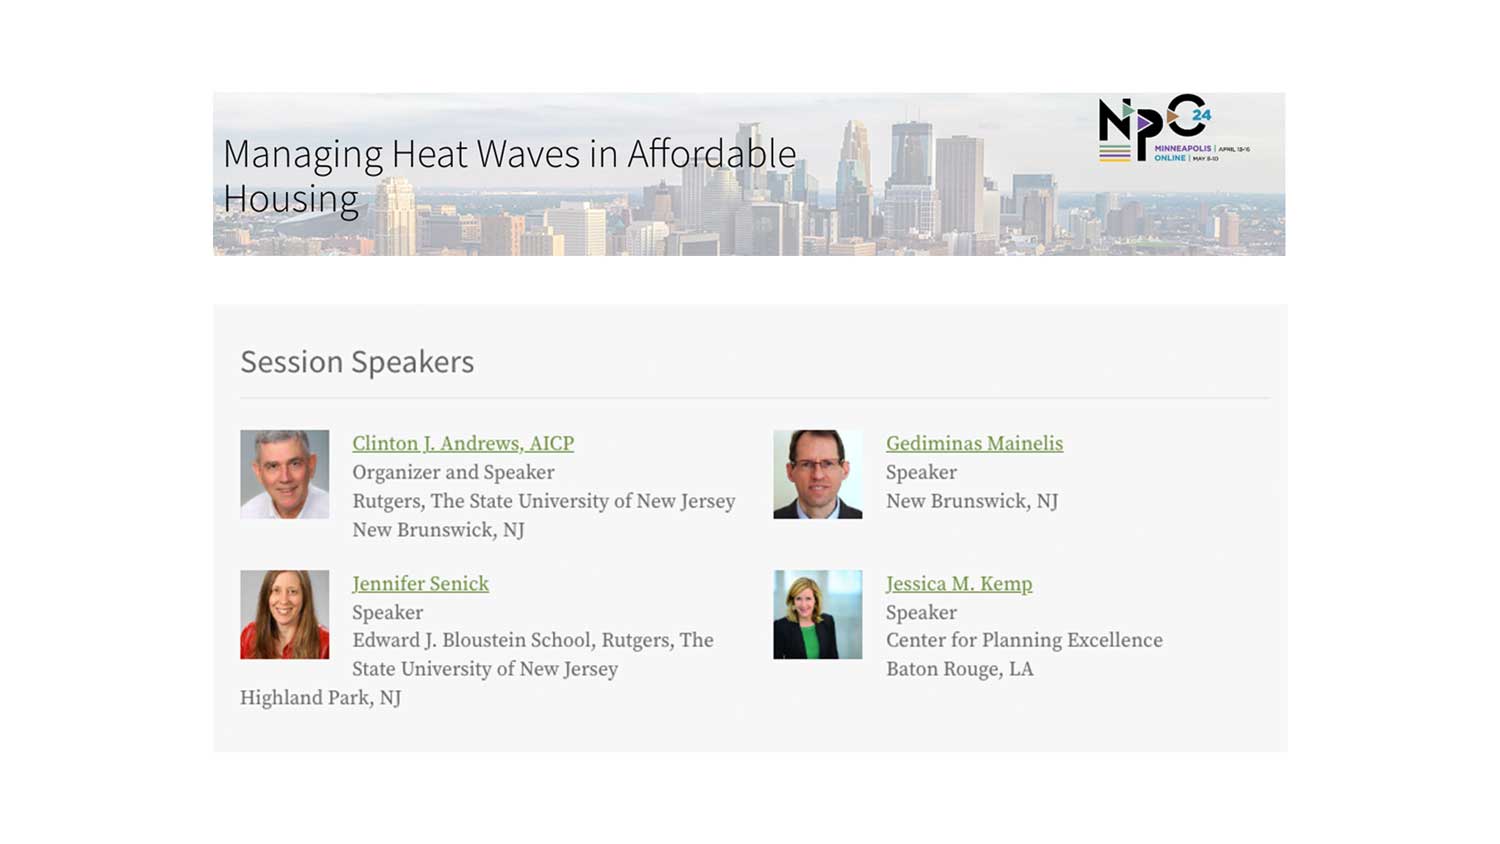 Managing Heat Waves in Affordable Housing